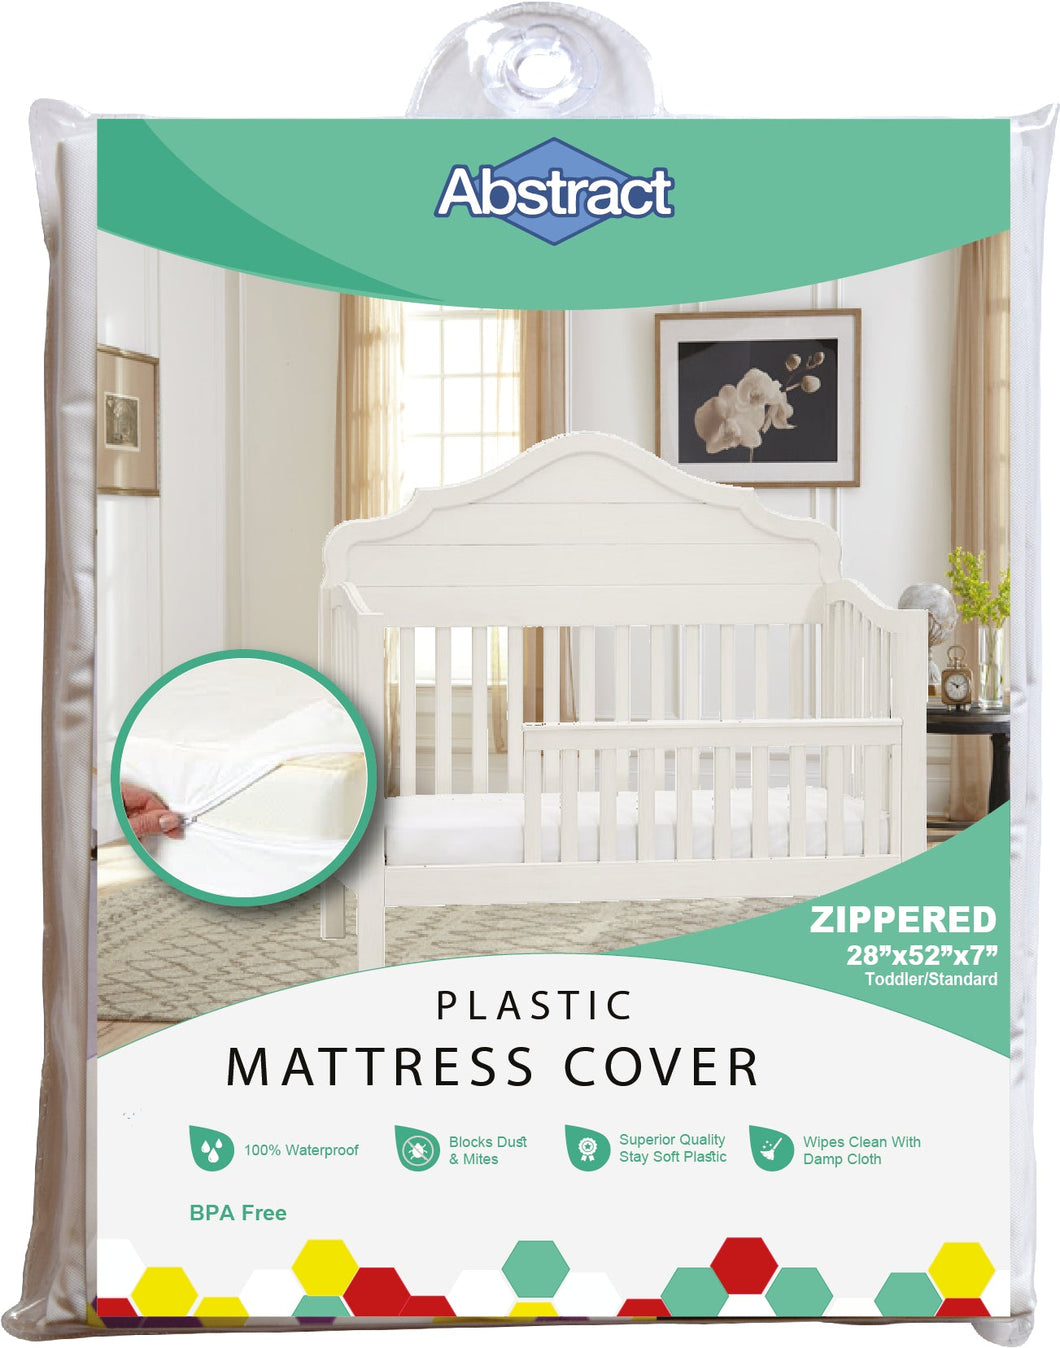 Abstract Zippered Fitted Mattress Cover